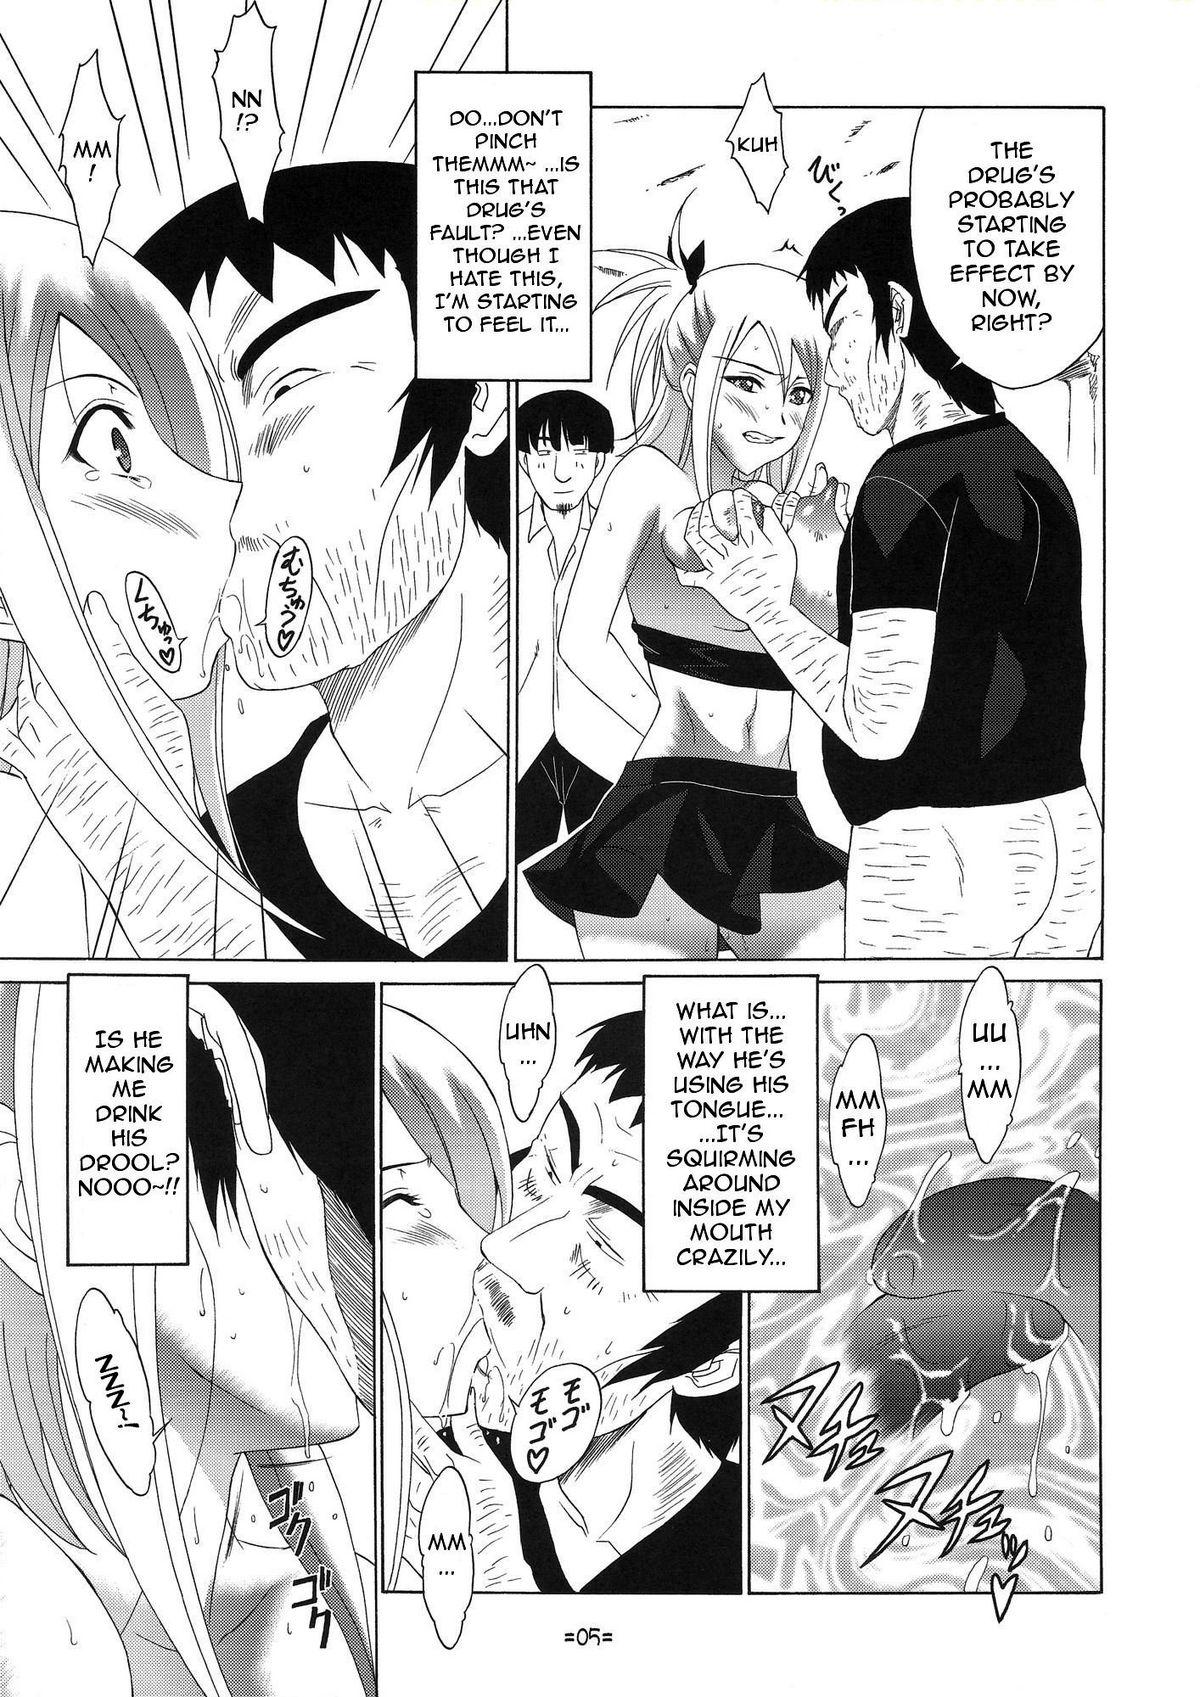 Mmf FAIRY SLAVE II - Fairy tail Model - Page 6